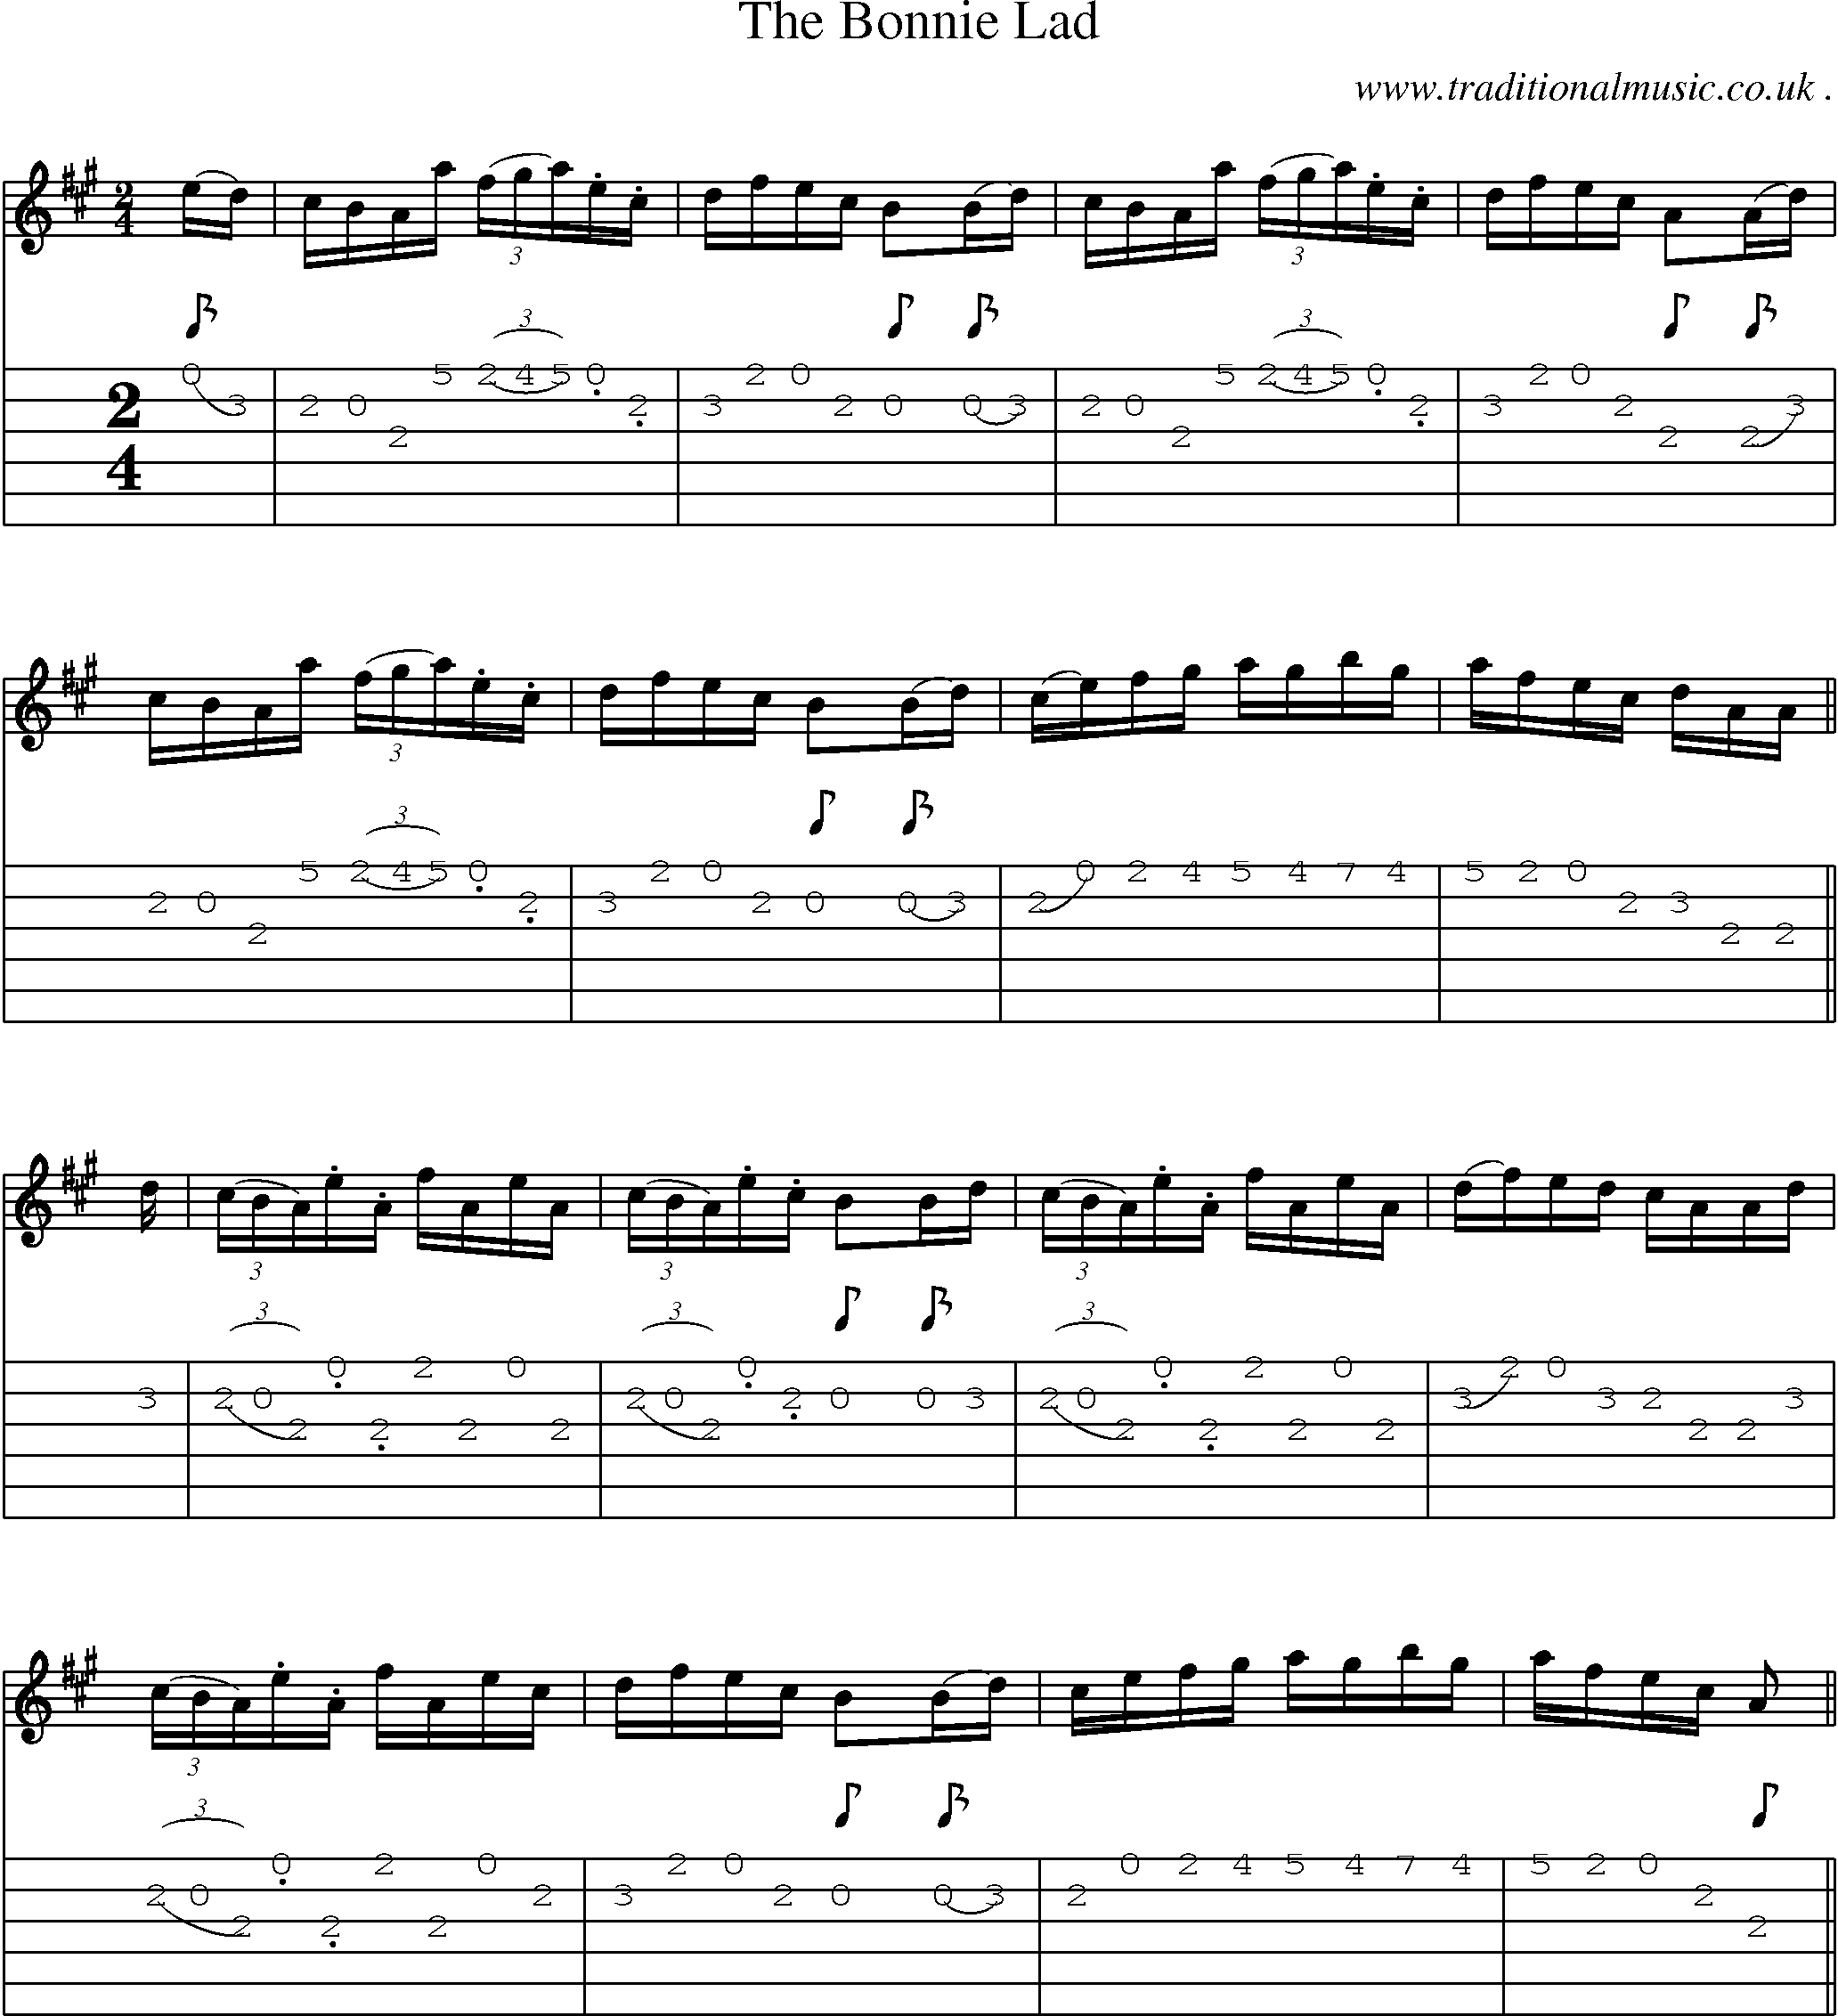 Sheet-Music and Guitar Tabs for The Bonnie Lad